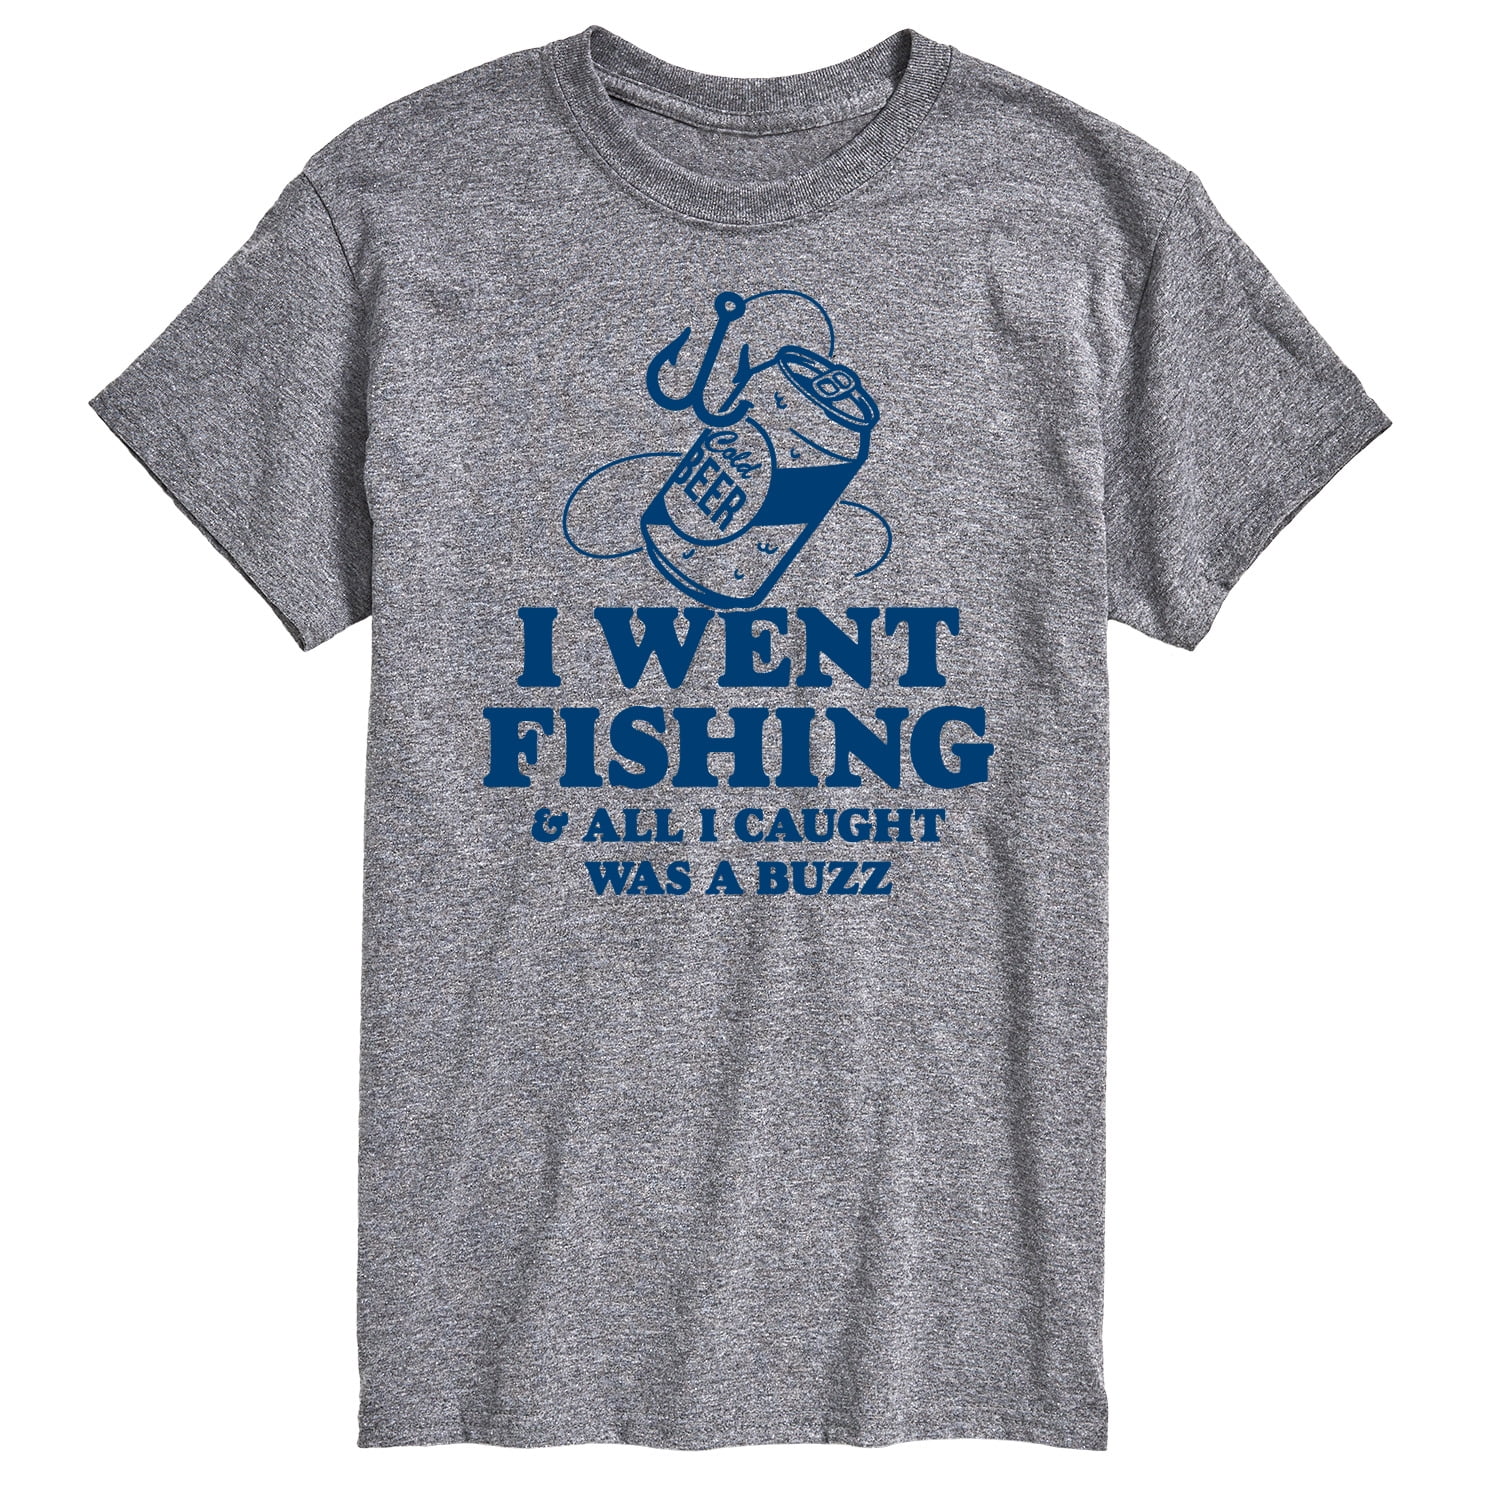 Instant Message - Went Fishing Caught A Buzz - Men's Short Sleeve Graphic  T-Shirt